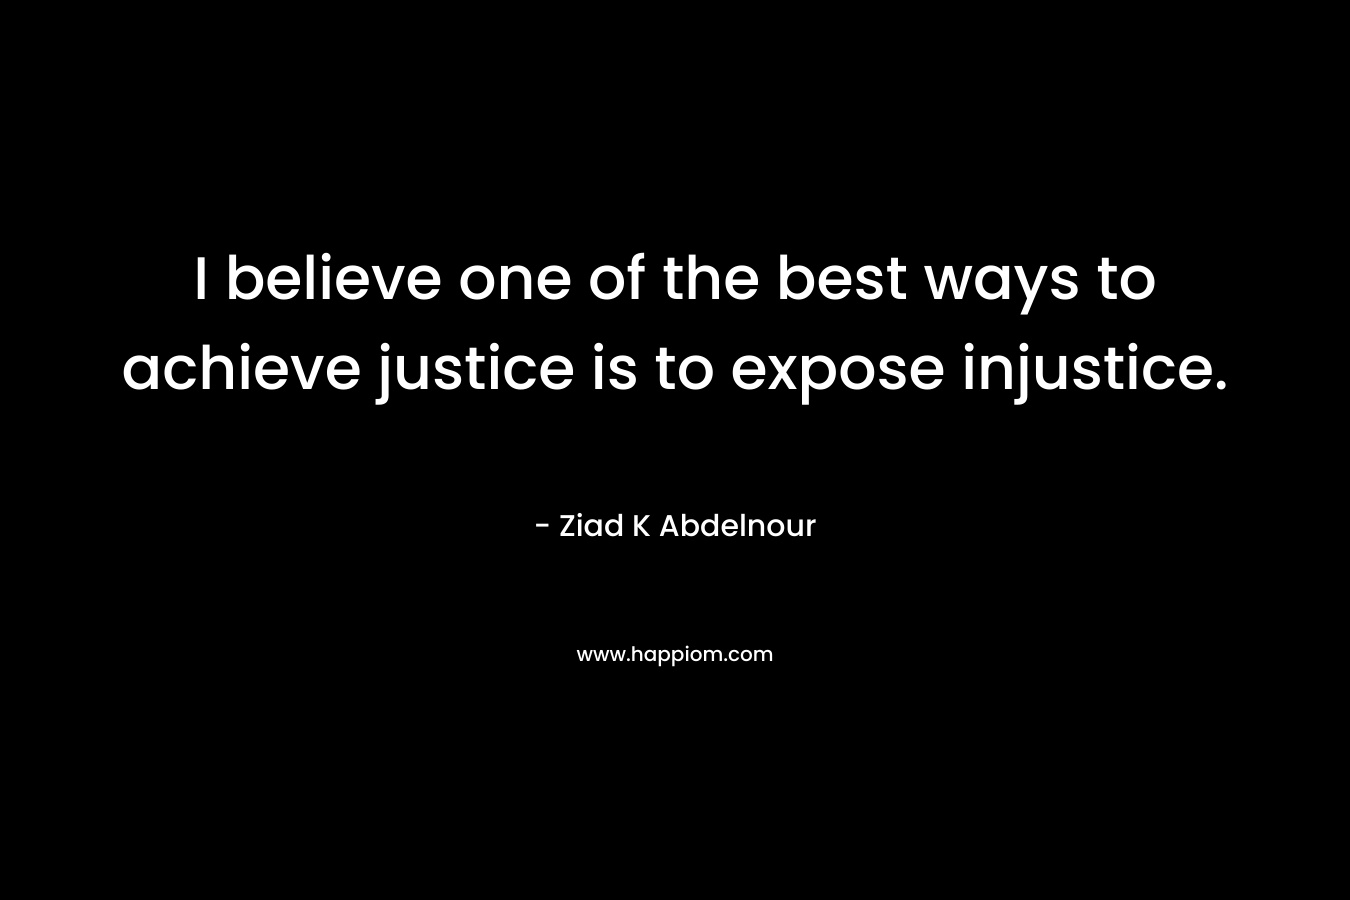 I believe one of the best ways to achieve justice is to expose injustice.